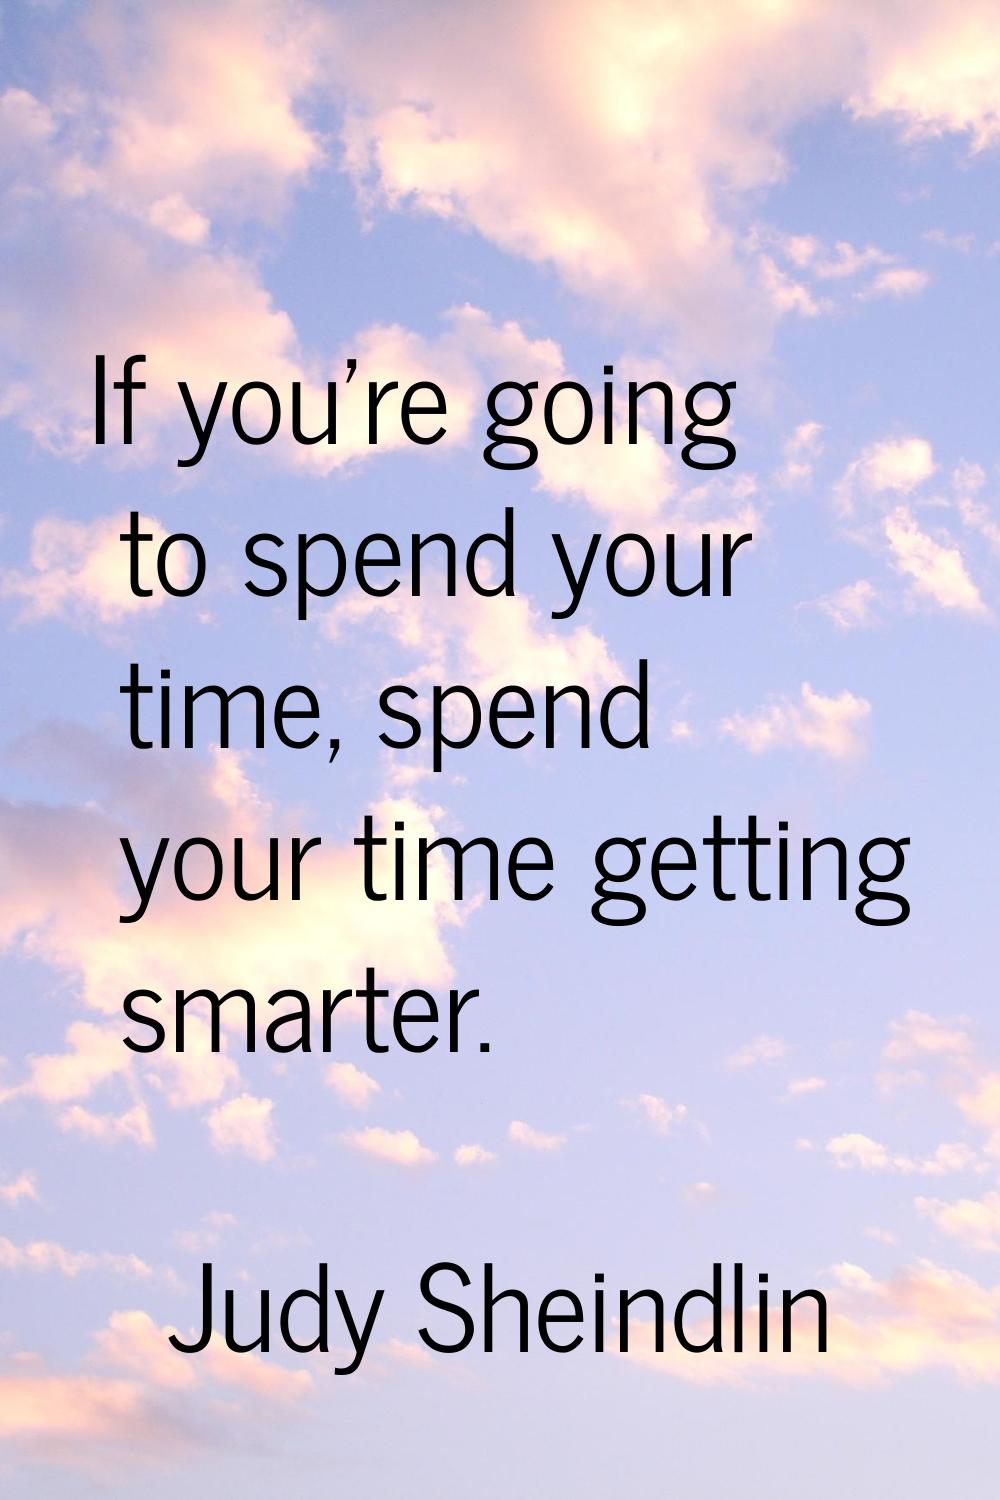 If you're going to spend your time, spend your time getting smarter.